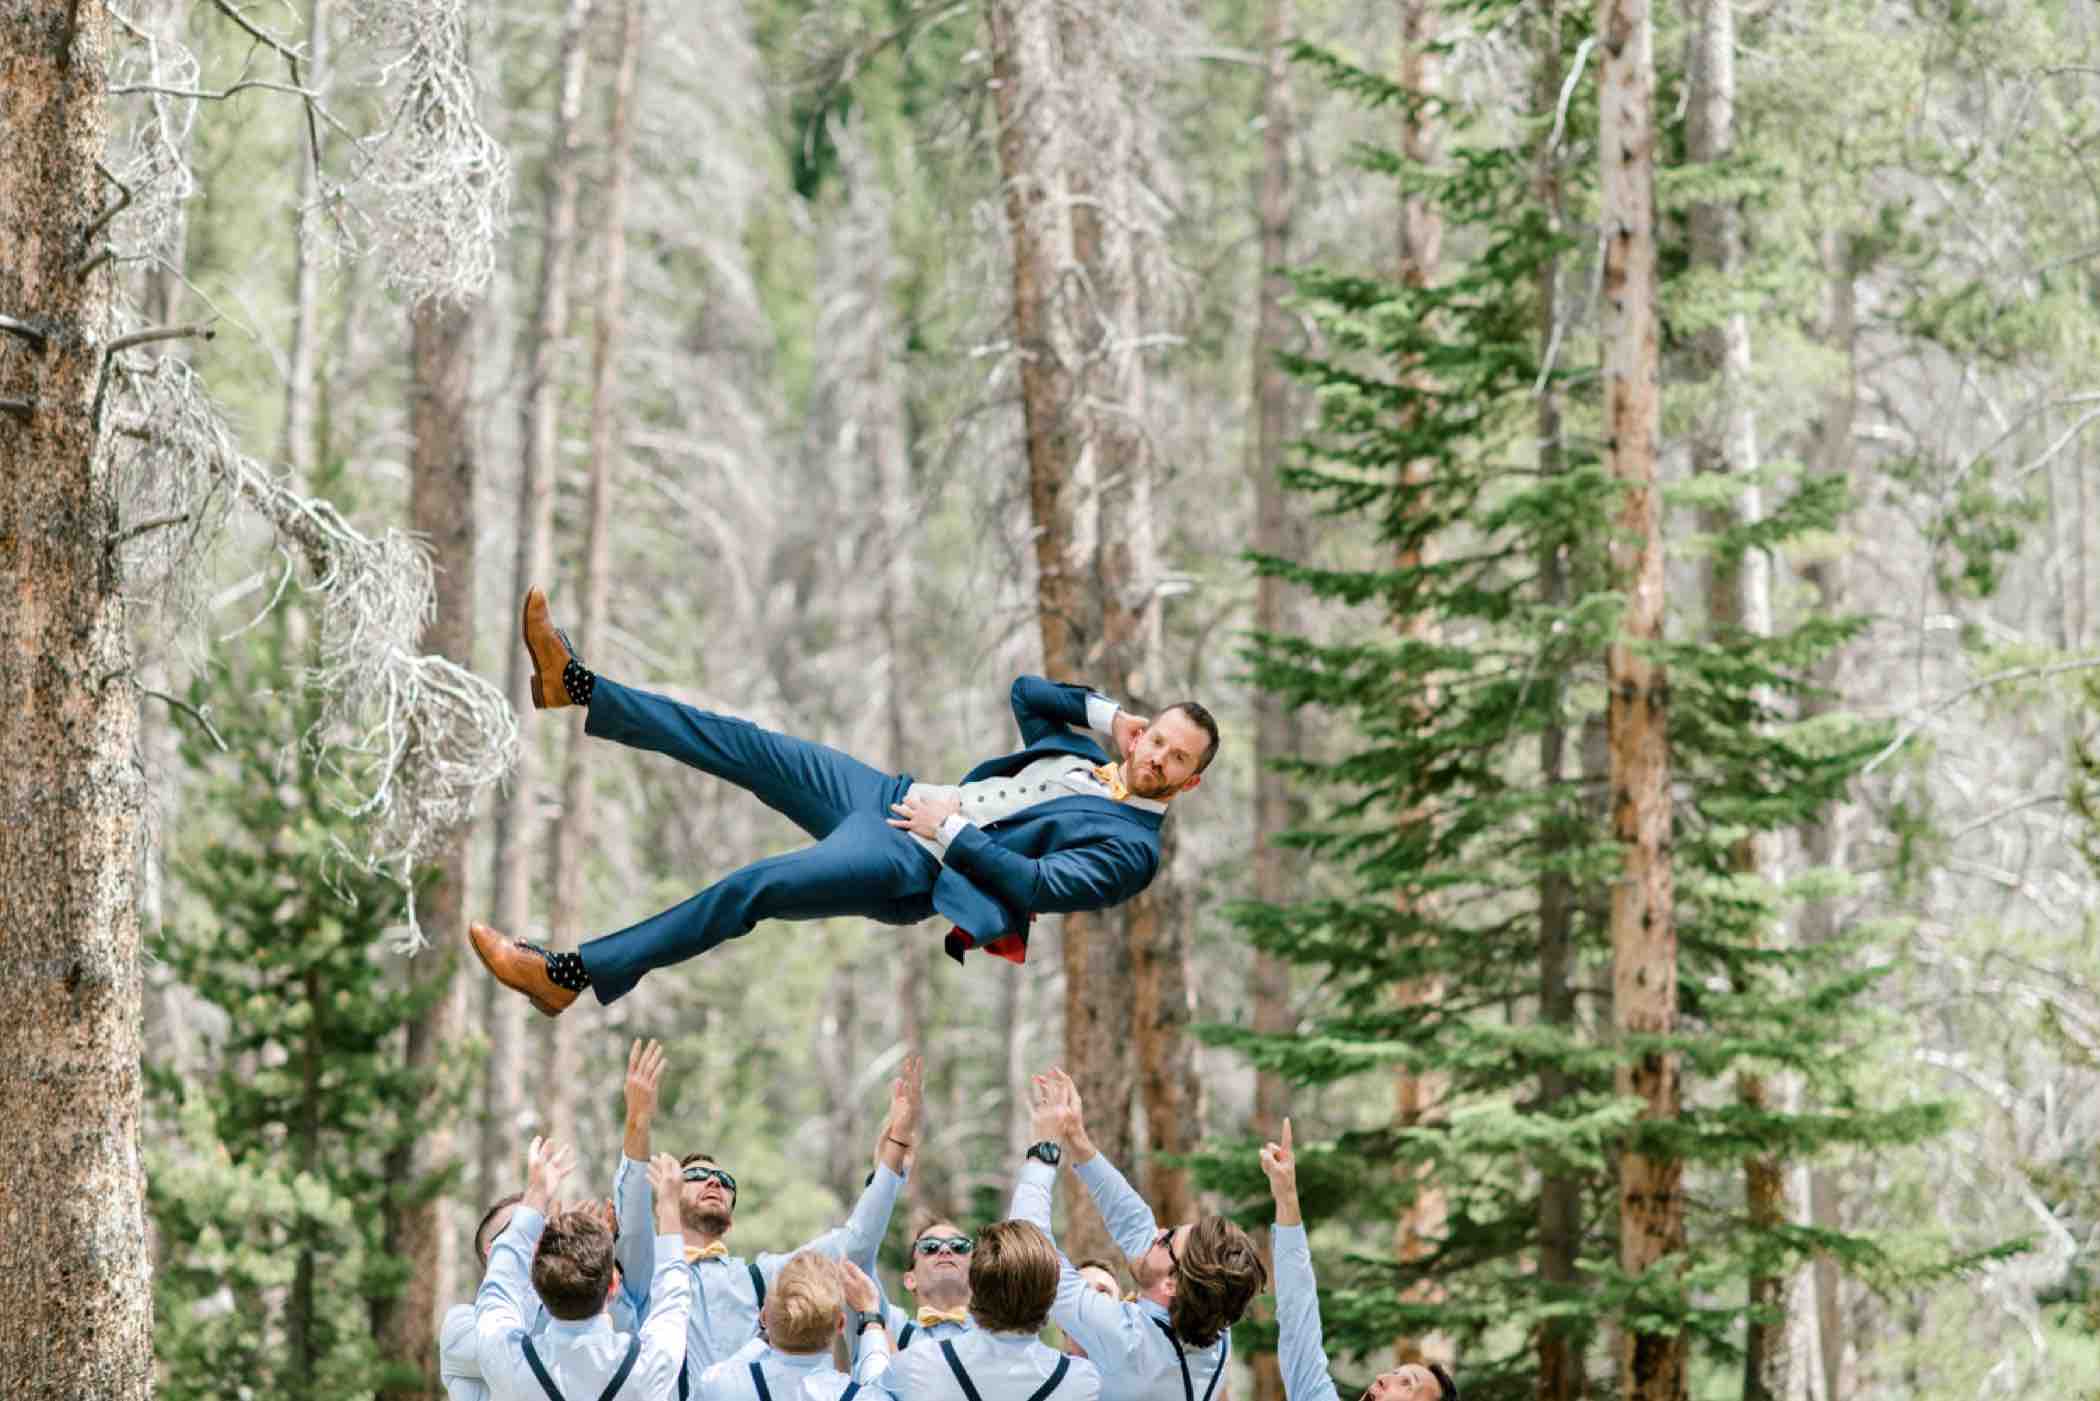 Groomsmen throwing the groom during photos outside Piney River Ranch in Vail in the Colorado Rocky Mountains. Photo by Ali and Garrett, Romantic, Adventurous, Nostalgic Wedding Photographers.